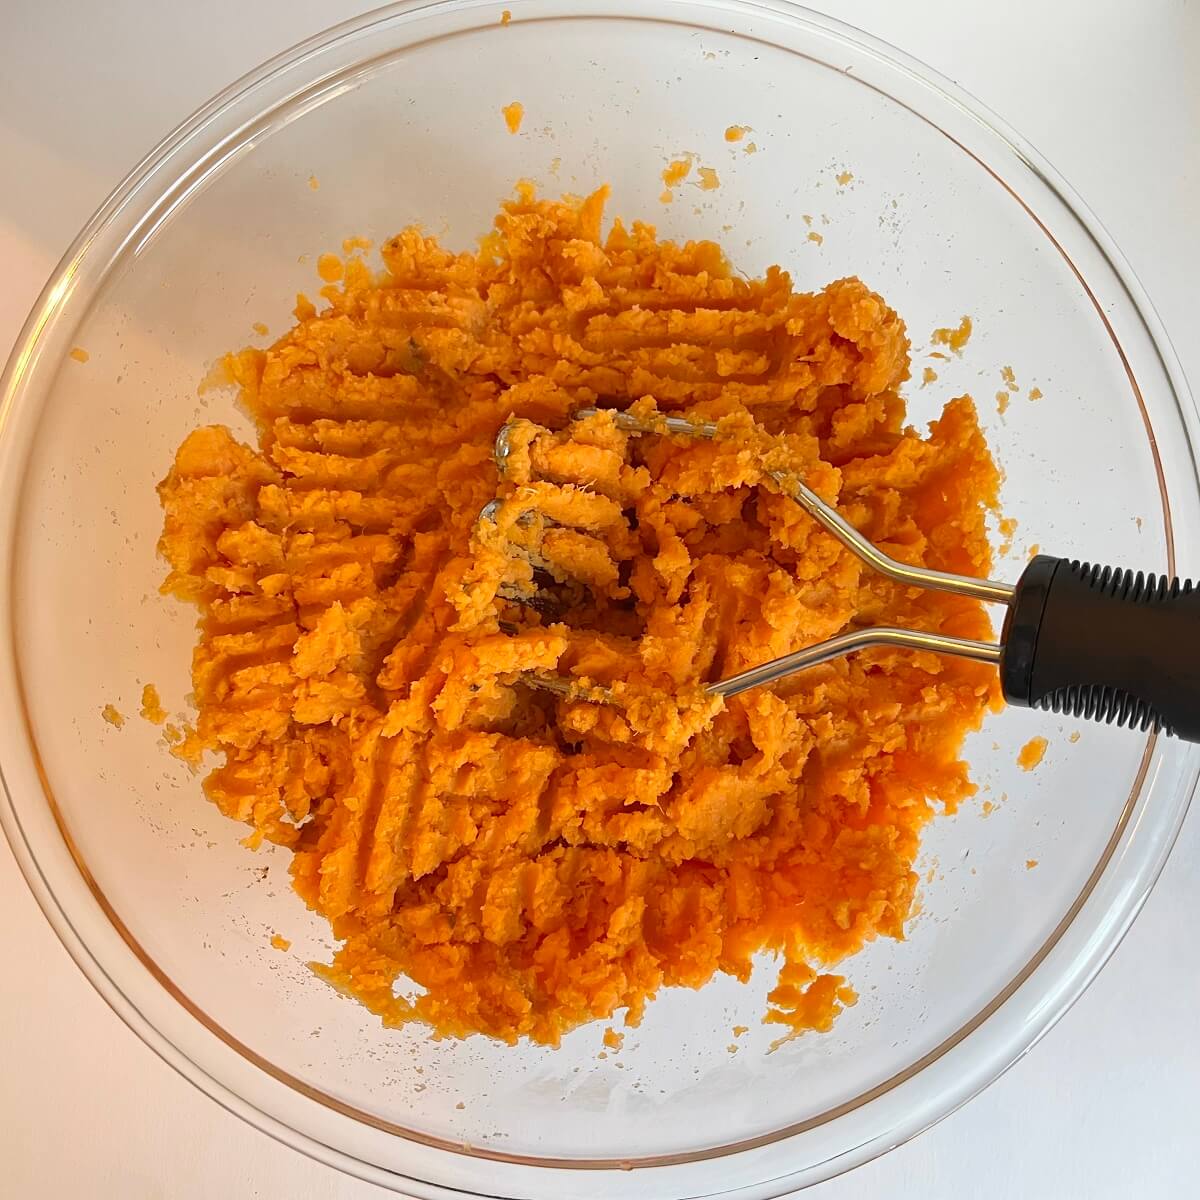 Mashed sweet potatoes in a glass bowl with a potato masher.